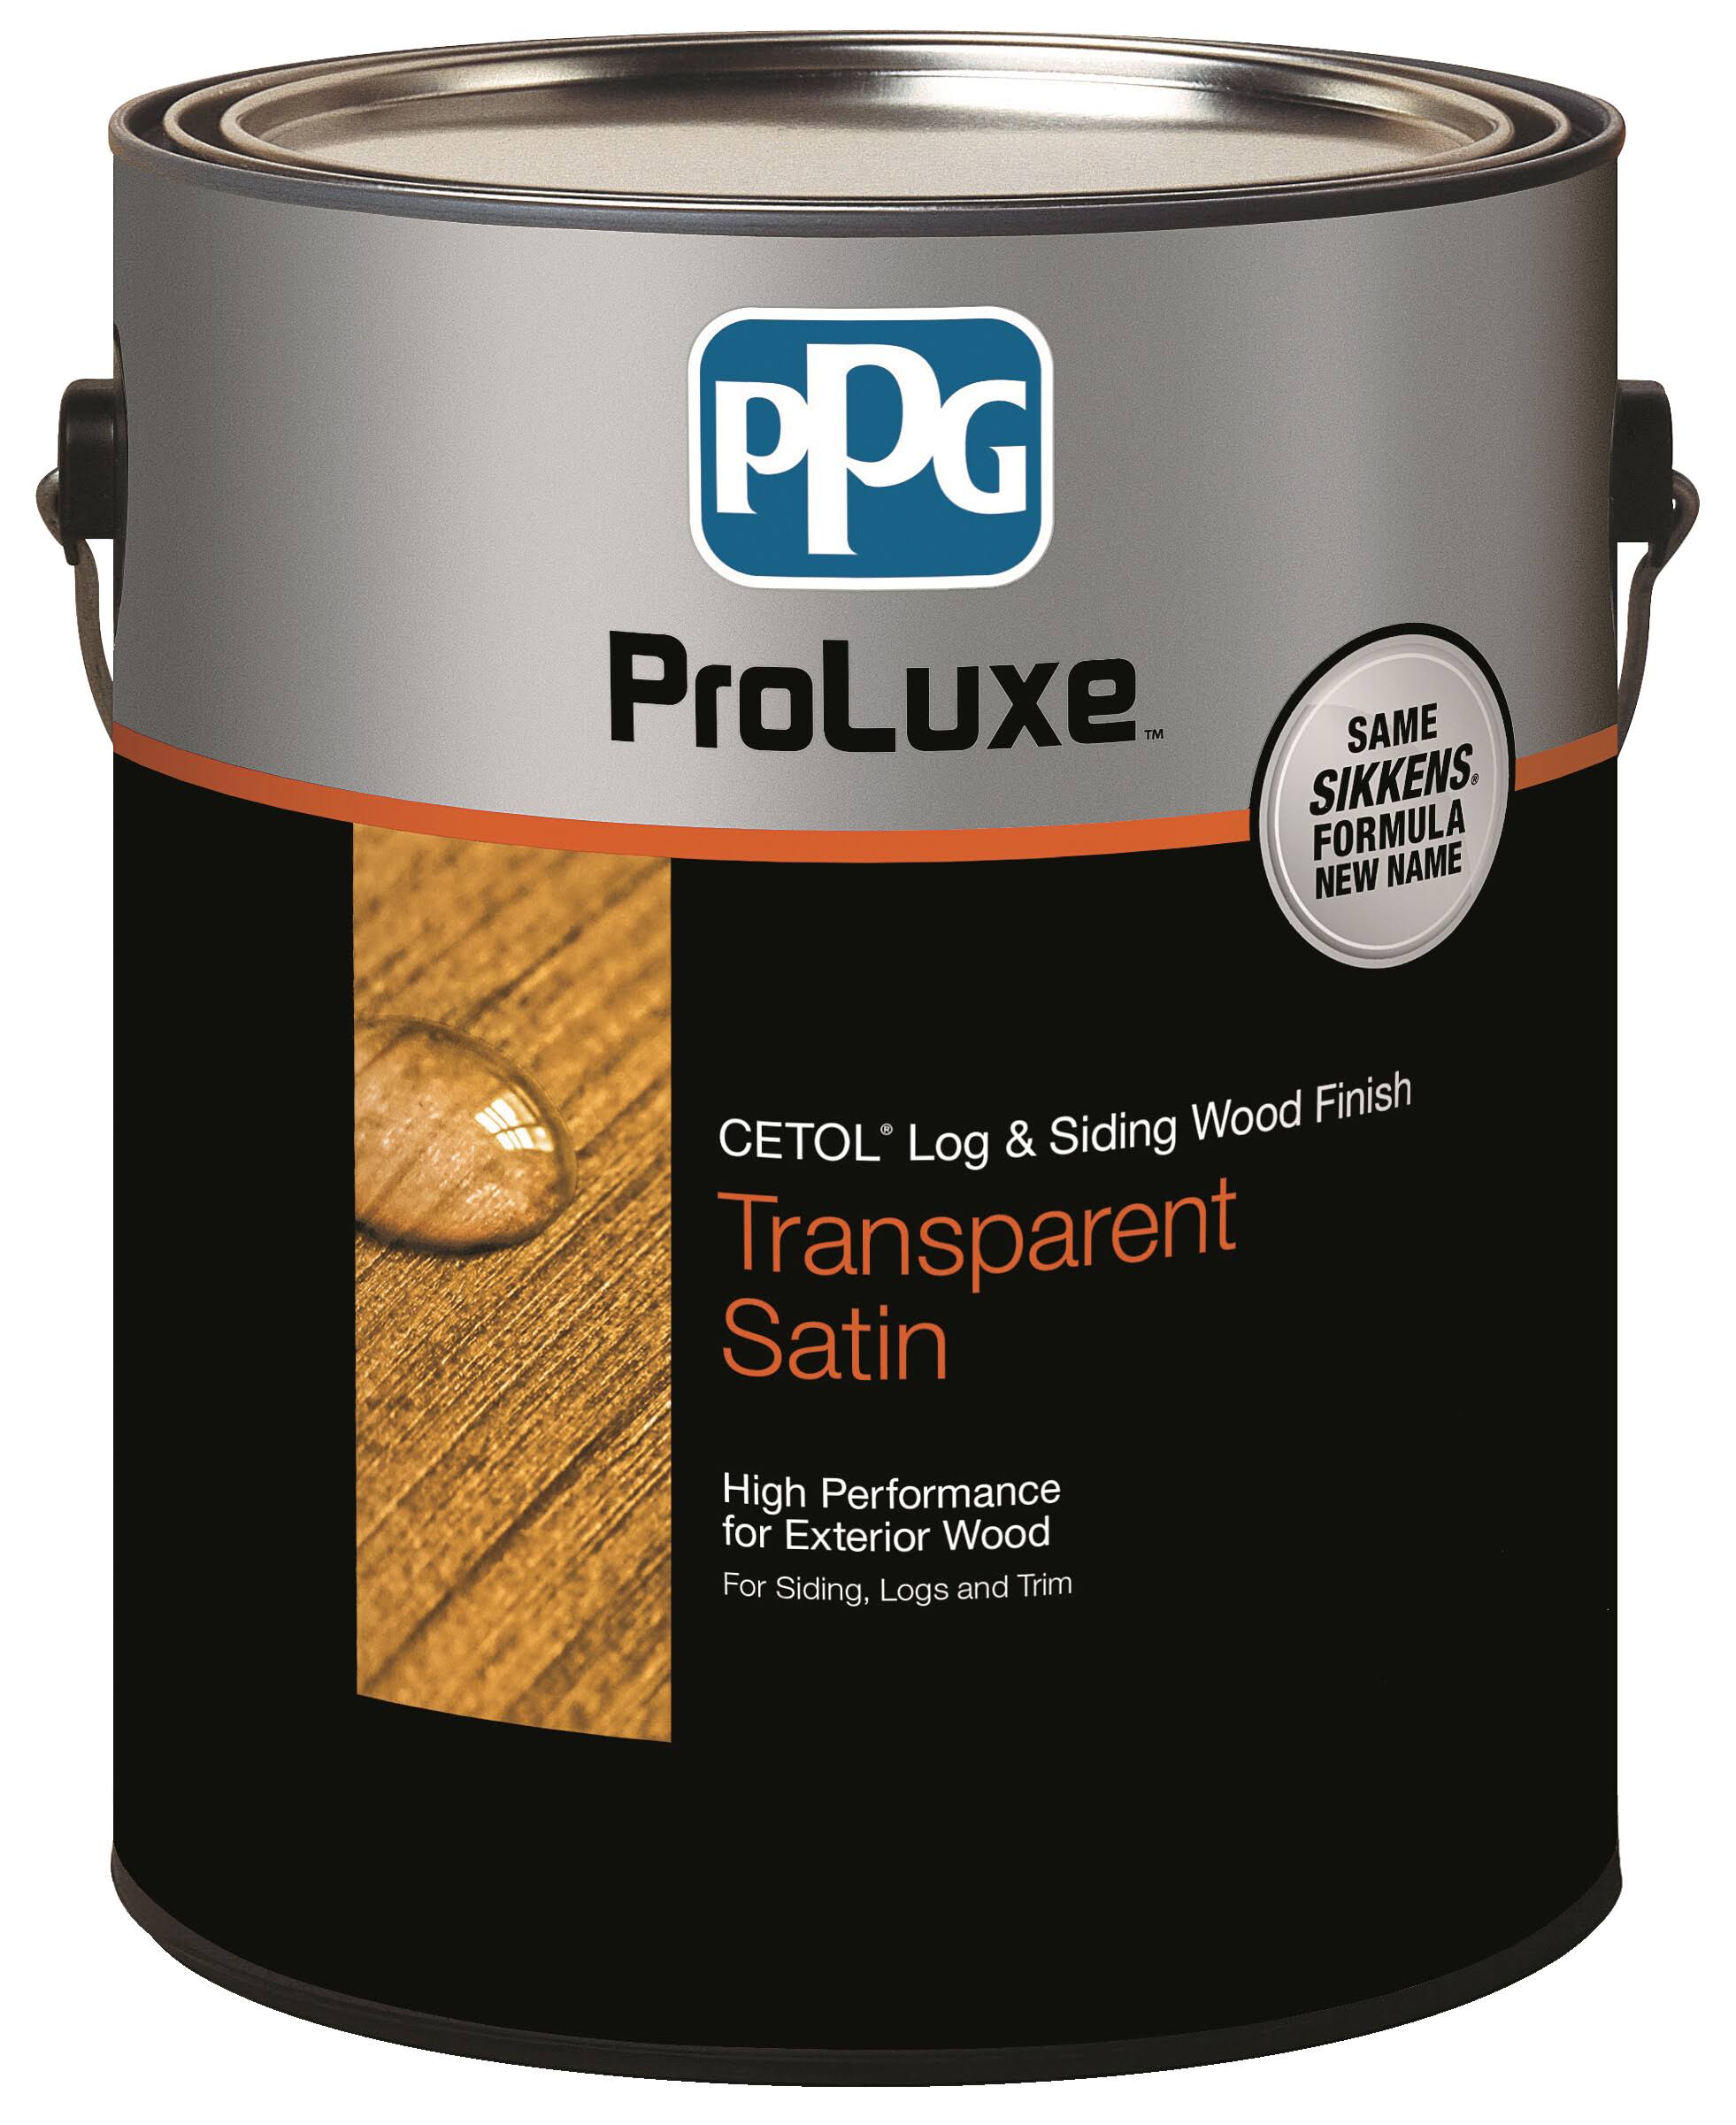 PPG Proluxe Cetol SIK42009/01 Log and Siding Wood Finish, Dark Oak, 1 gal Can